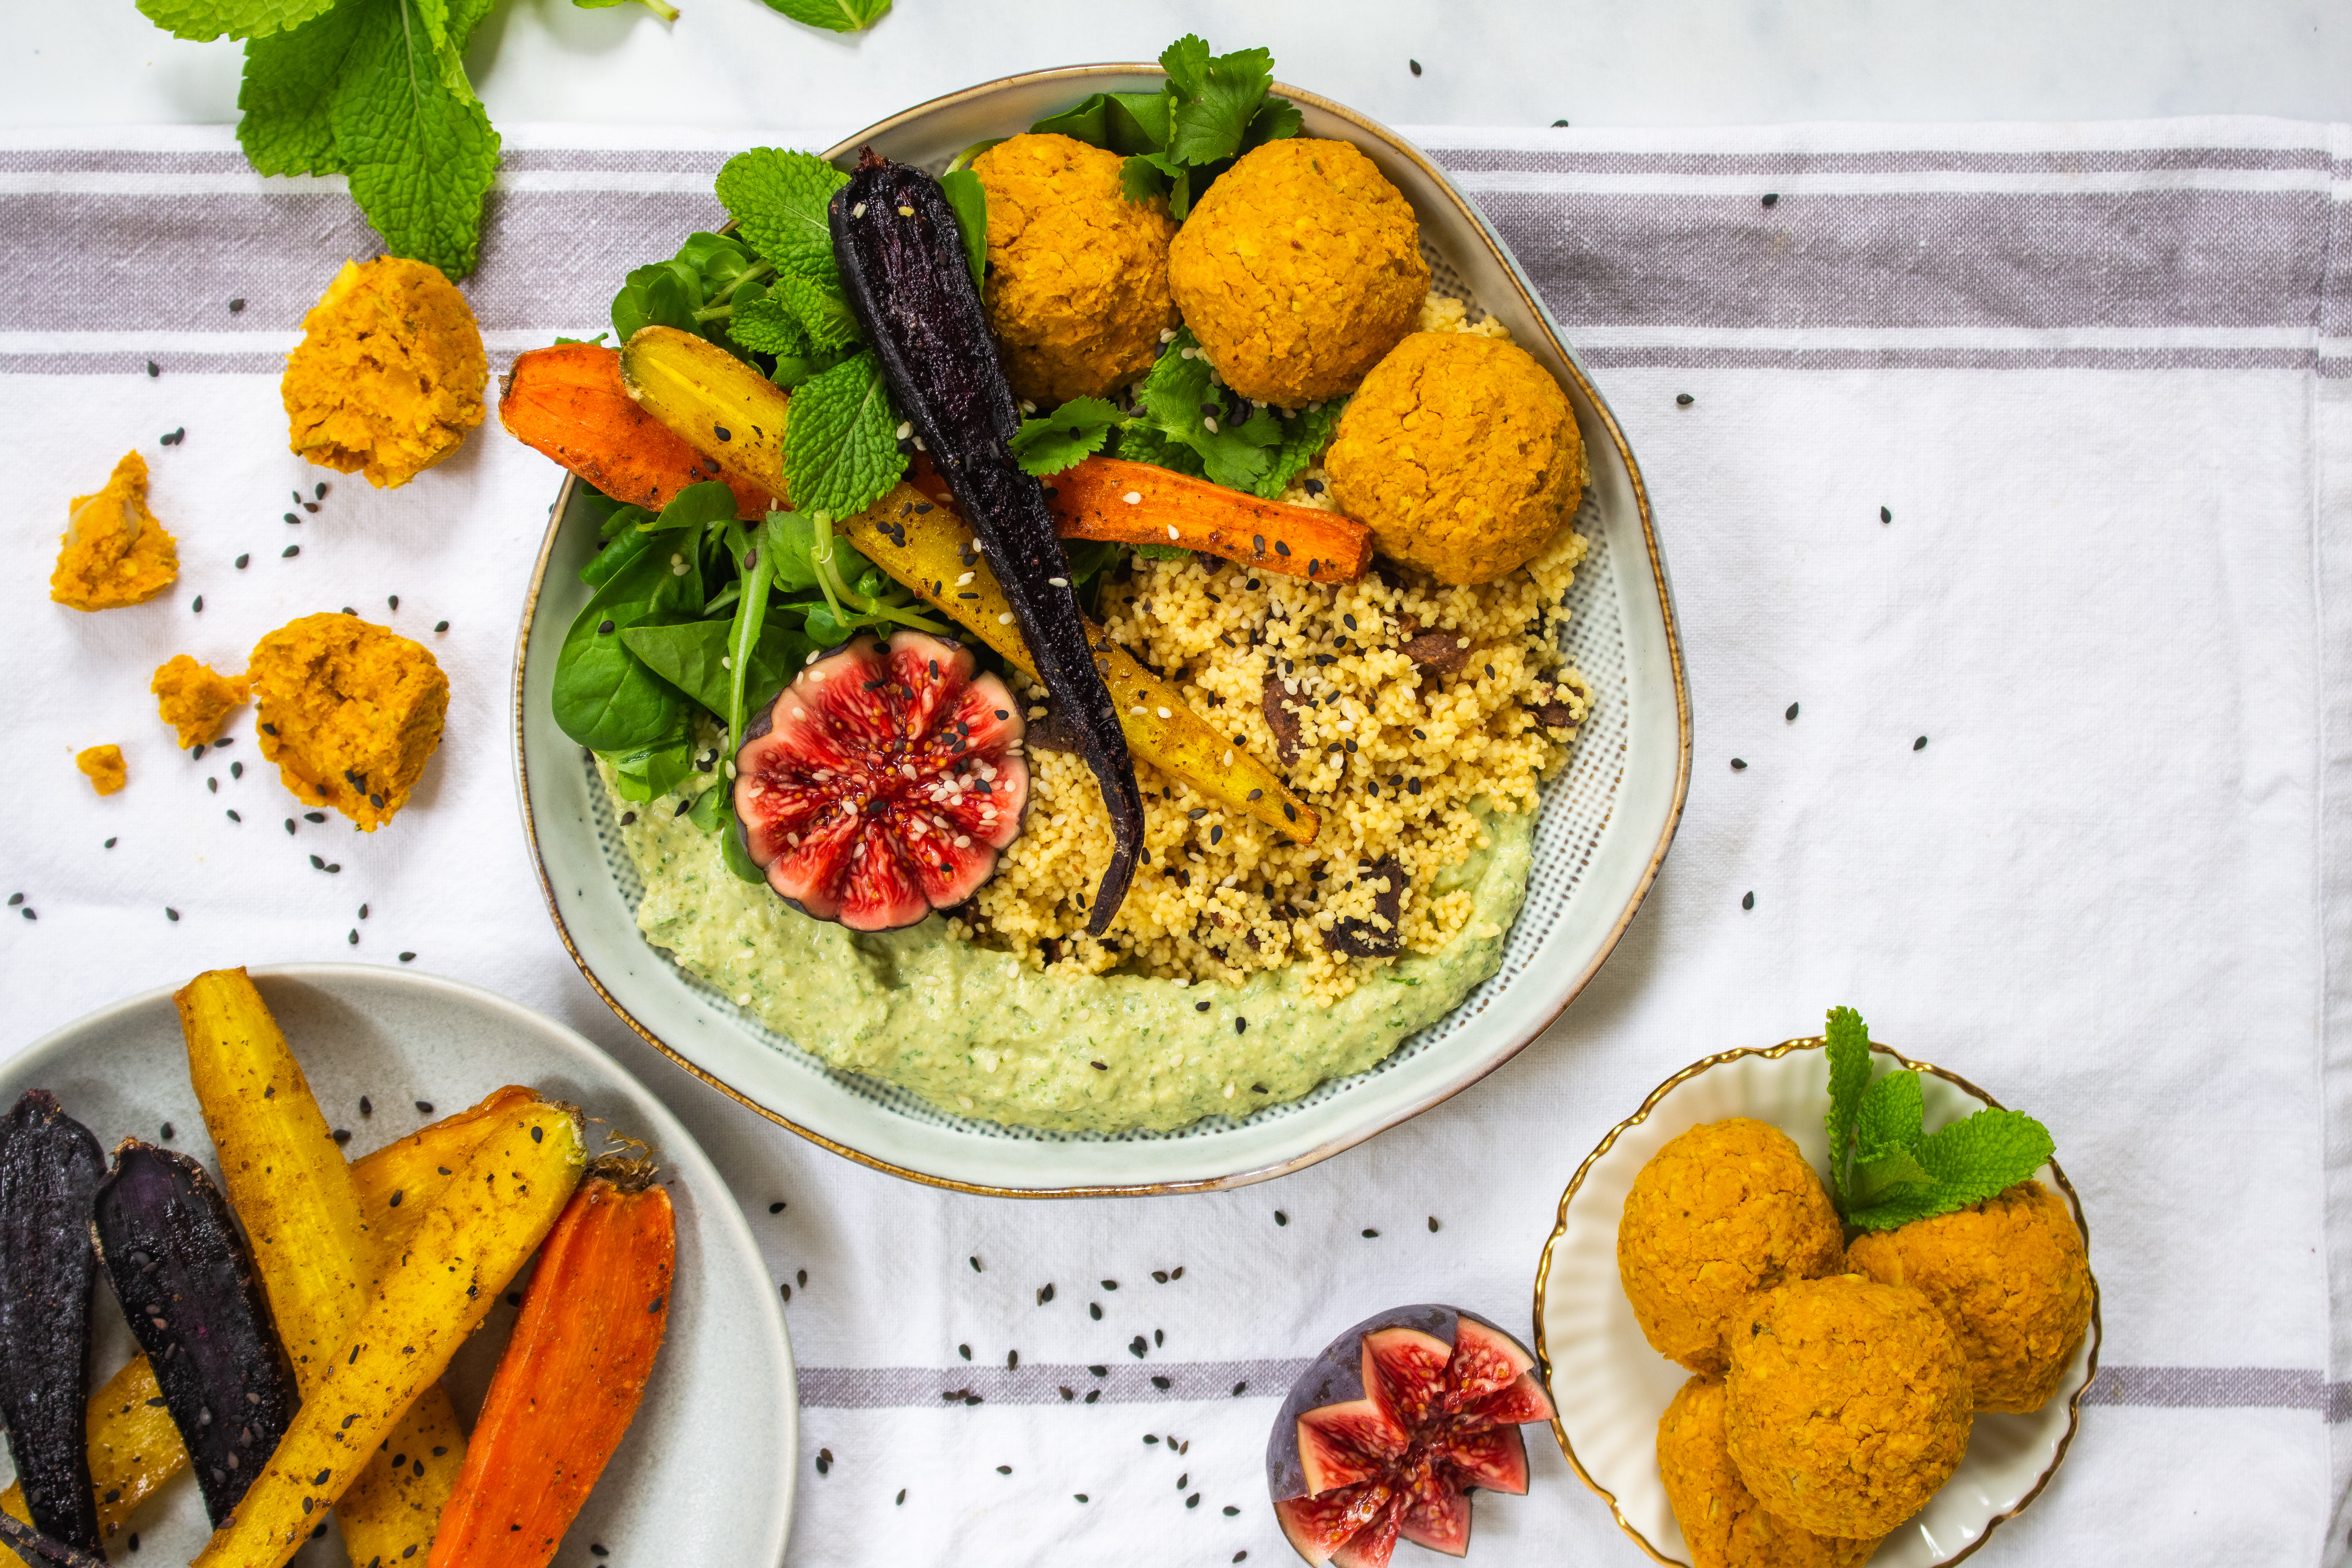 Baked Pumpkin Falafel Bowl with Herby Hummus and Roasted Carrots